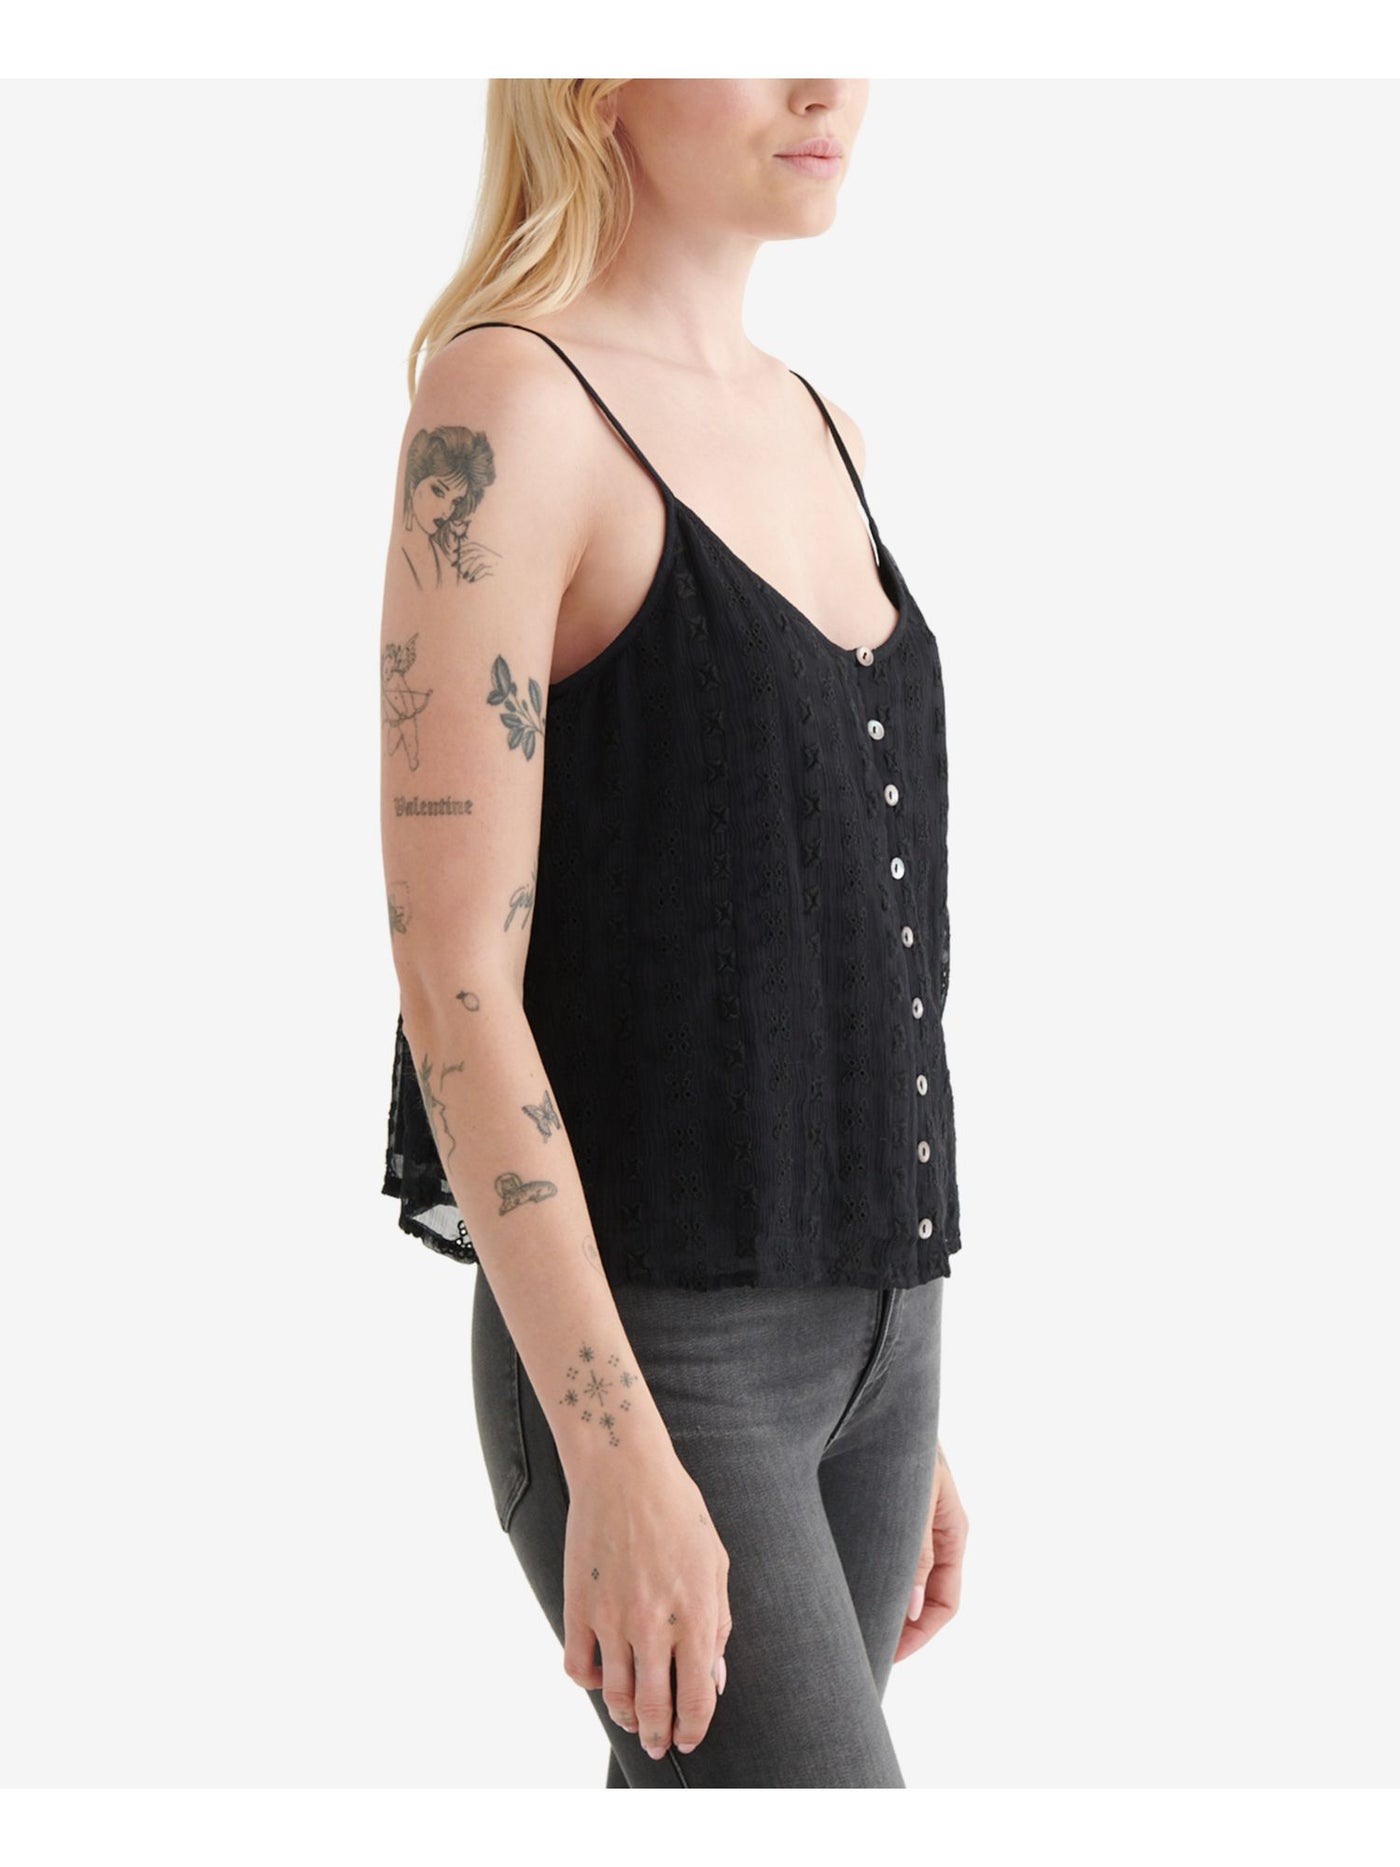 LUCKY BRAND Womens Black Embroidered Eyelet Button Front Lined Spaghetti Strap V Neck Tank Top XS